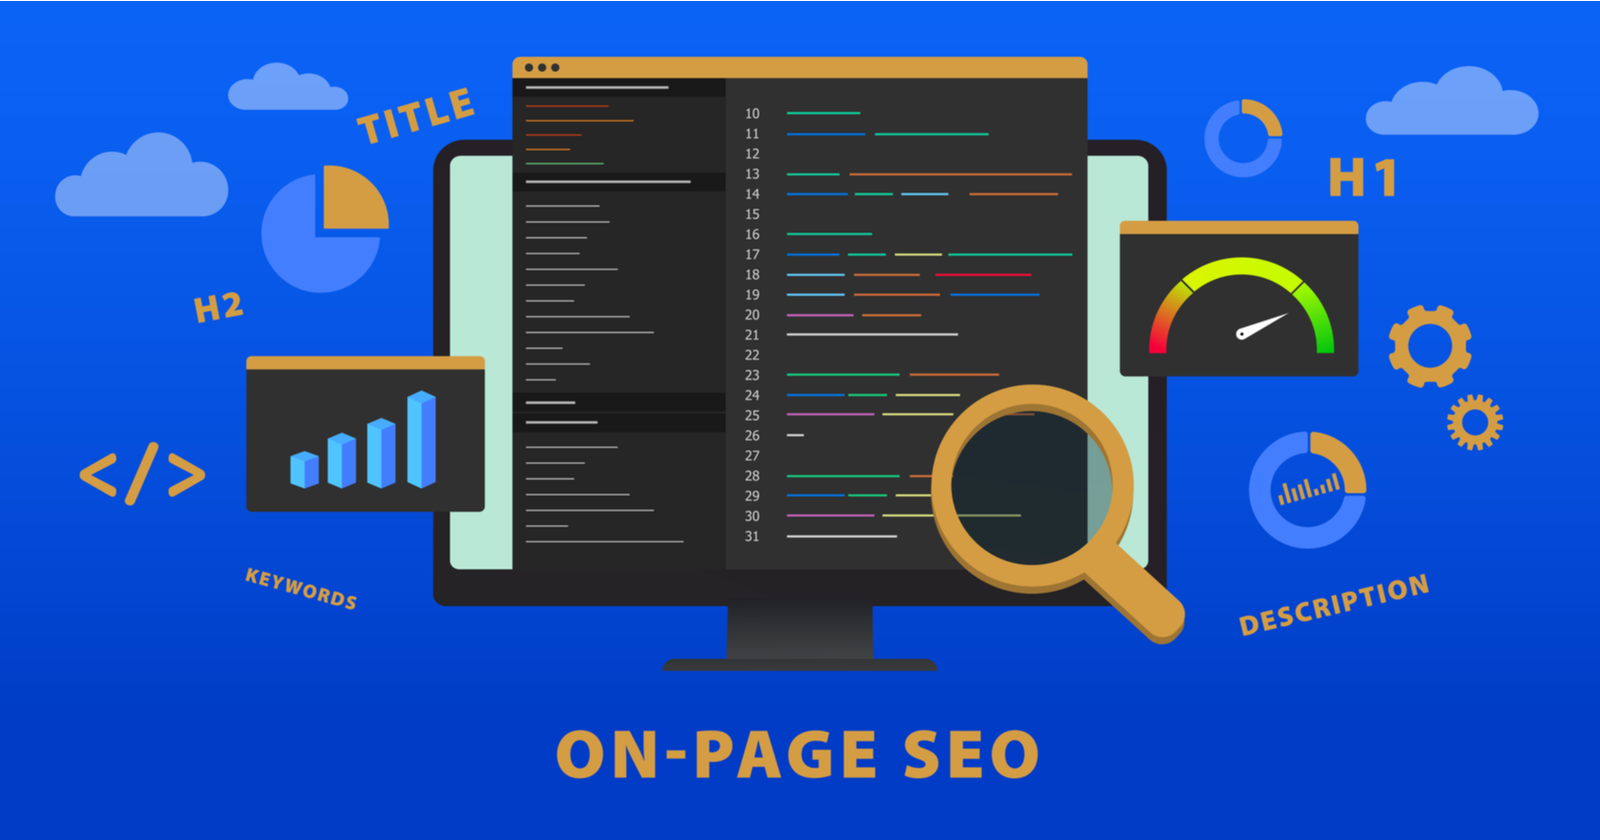 SEO pros always pay attention to on-page SEO.